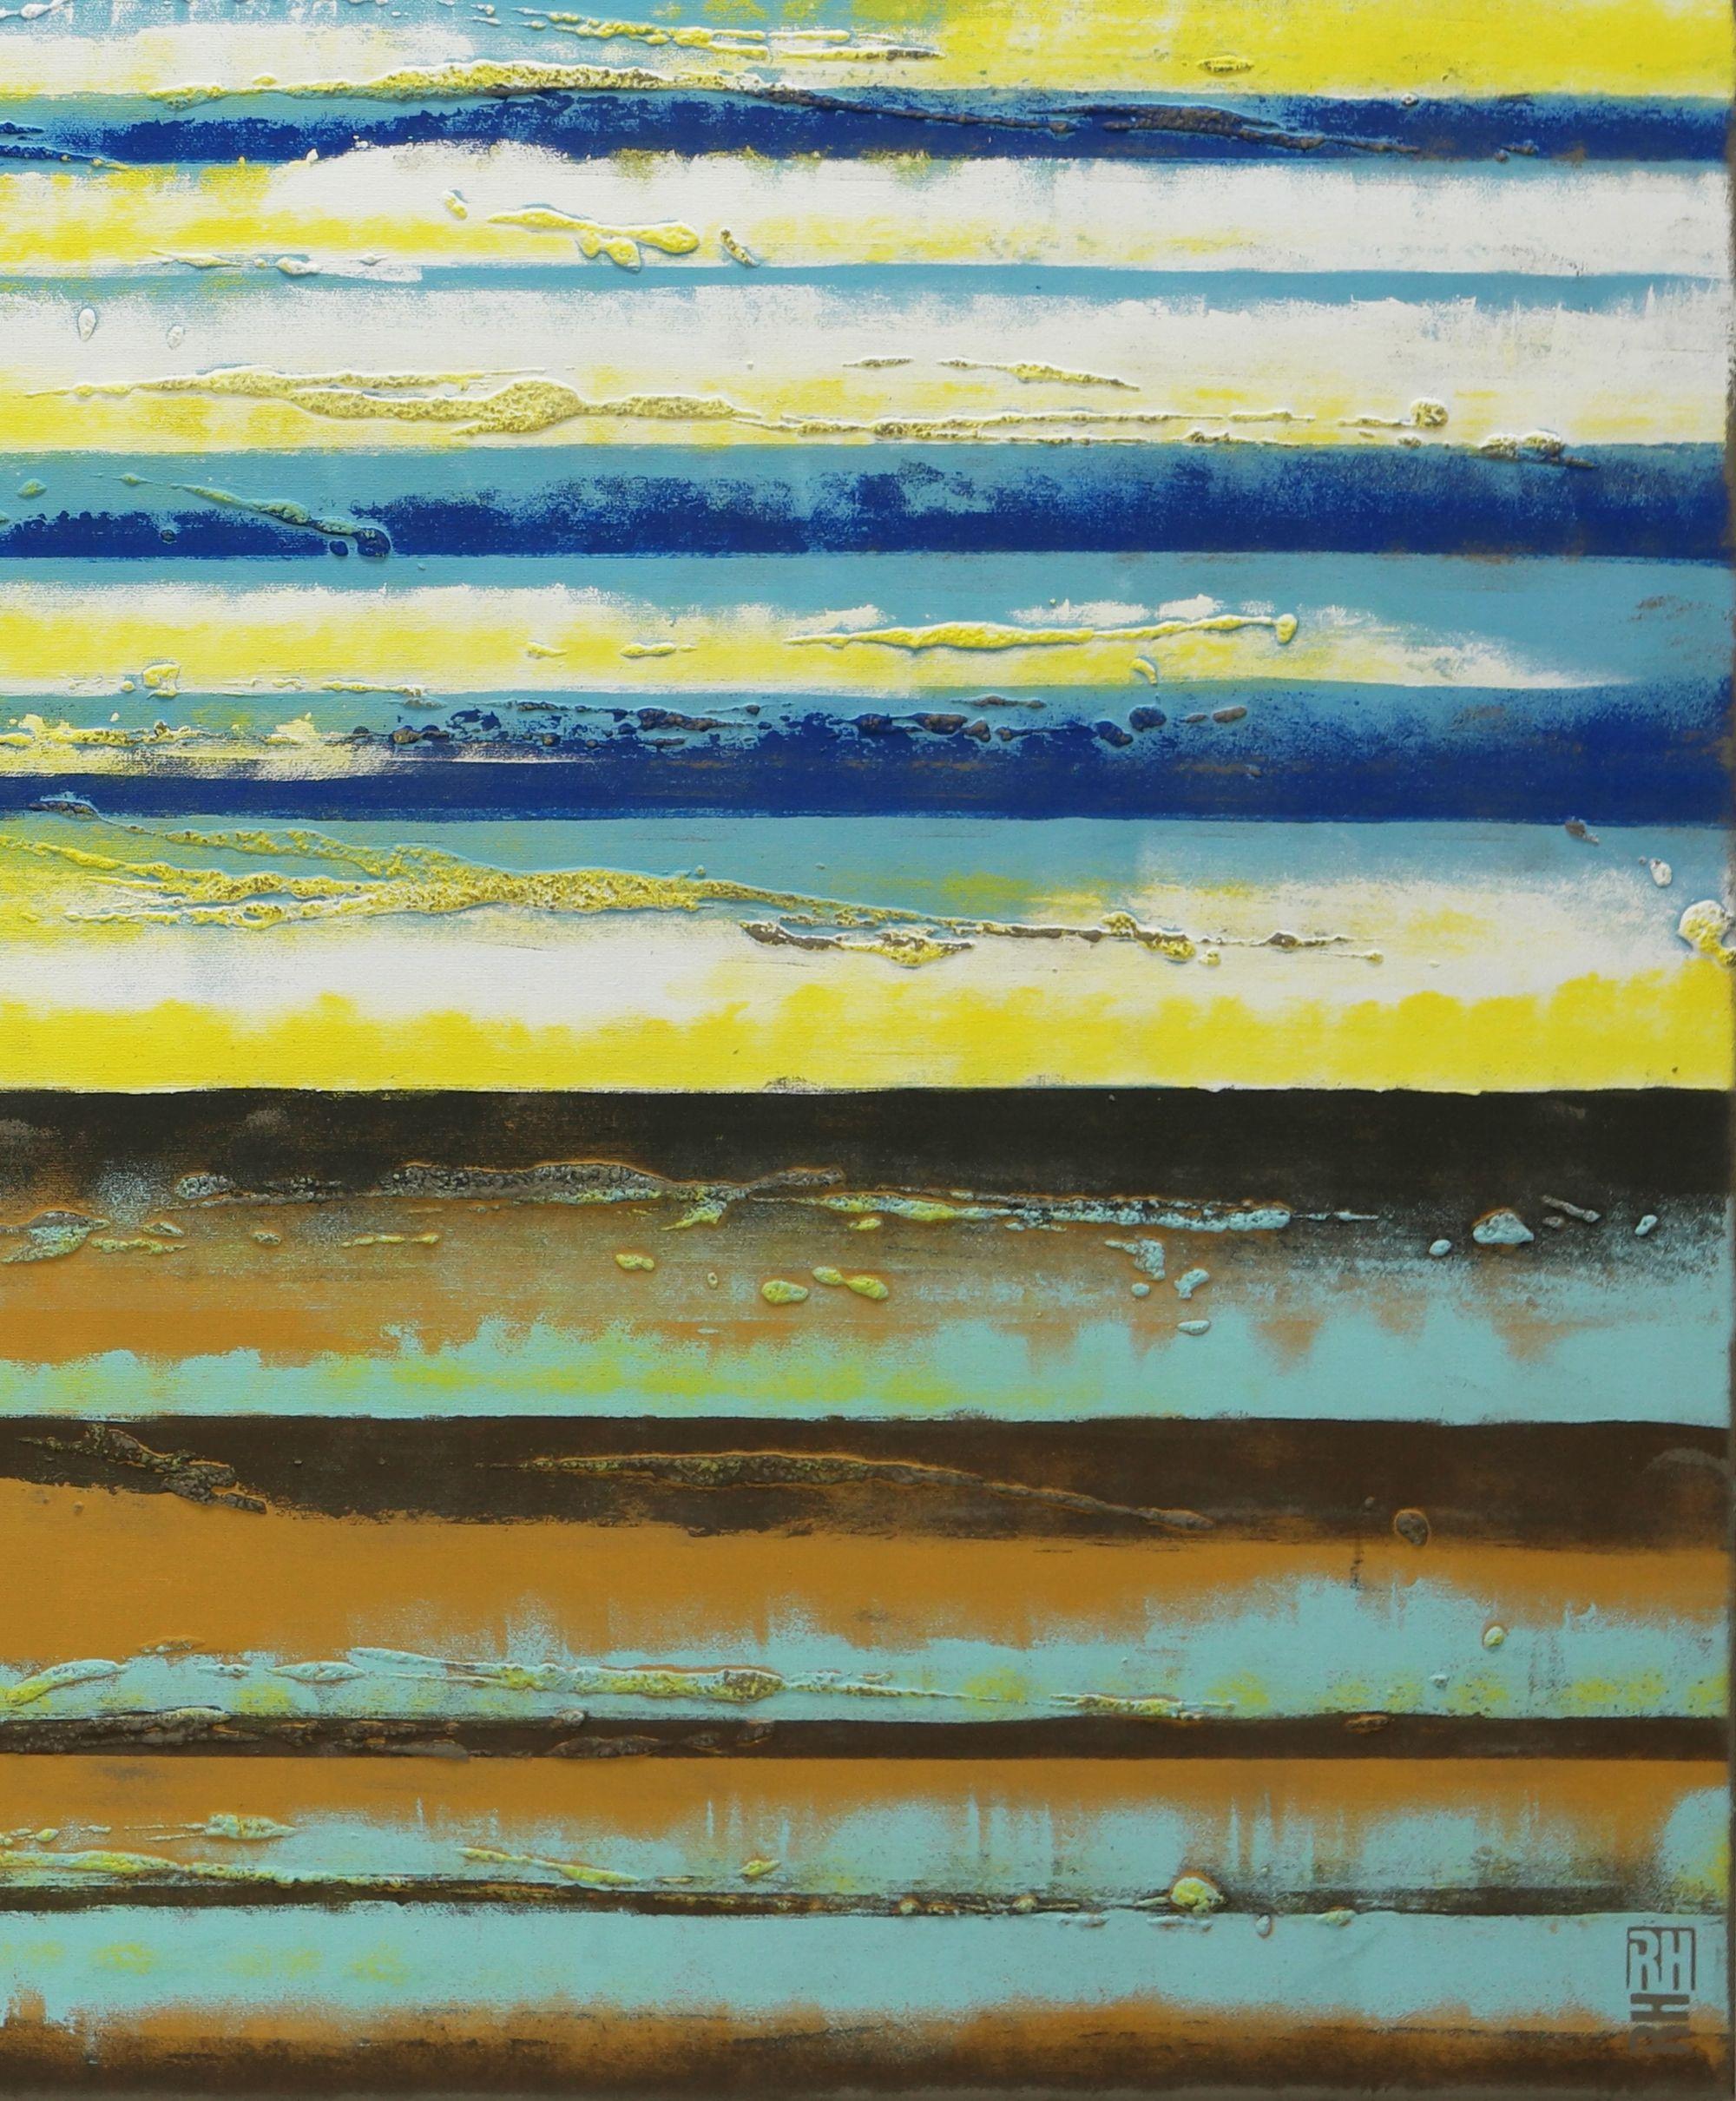 Extra Large Acrylic Abstract Painting, Original artwork created by Ronald Hunter.    An abstract composition of blue shades, brown and green, reminiscent of a shoreline. This abstract painting is made with many layers of acrylic paint, creating